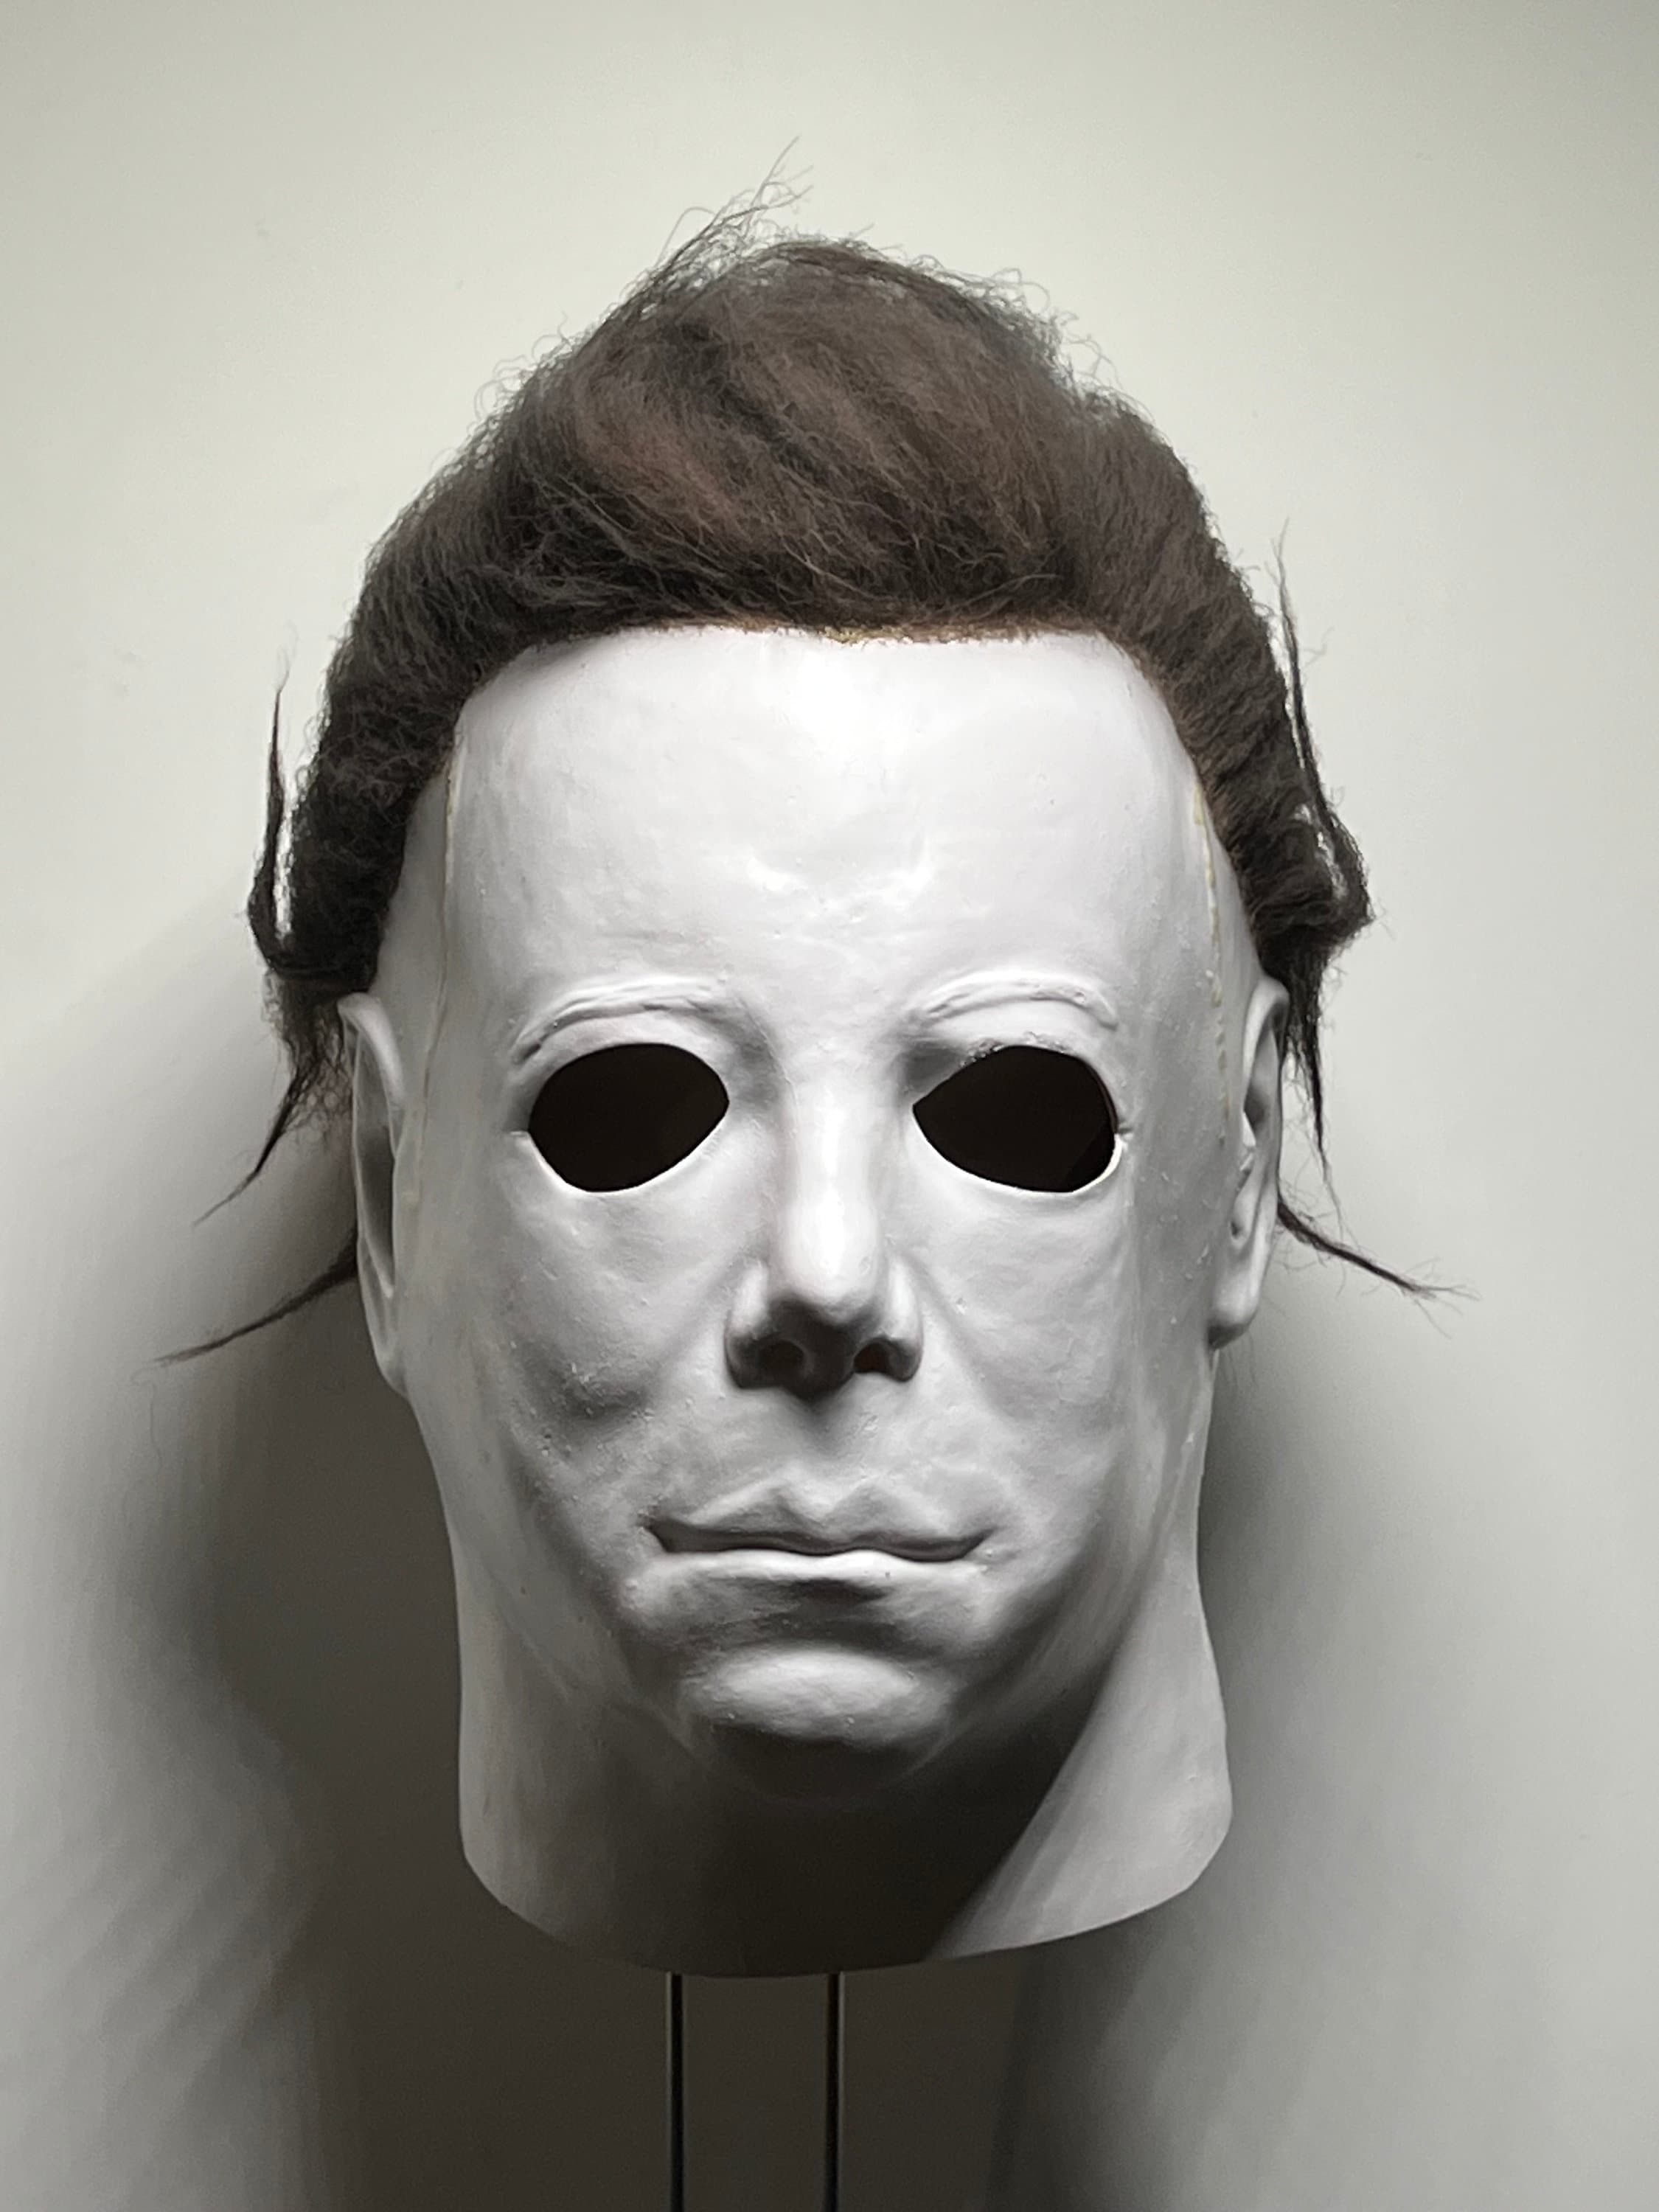 Michael Myers Mask Halloween H20: Twenty Years Later. Express delivery